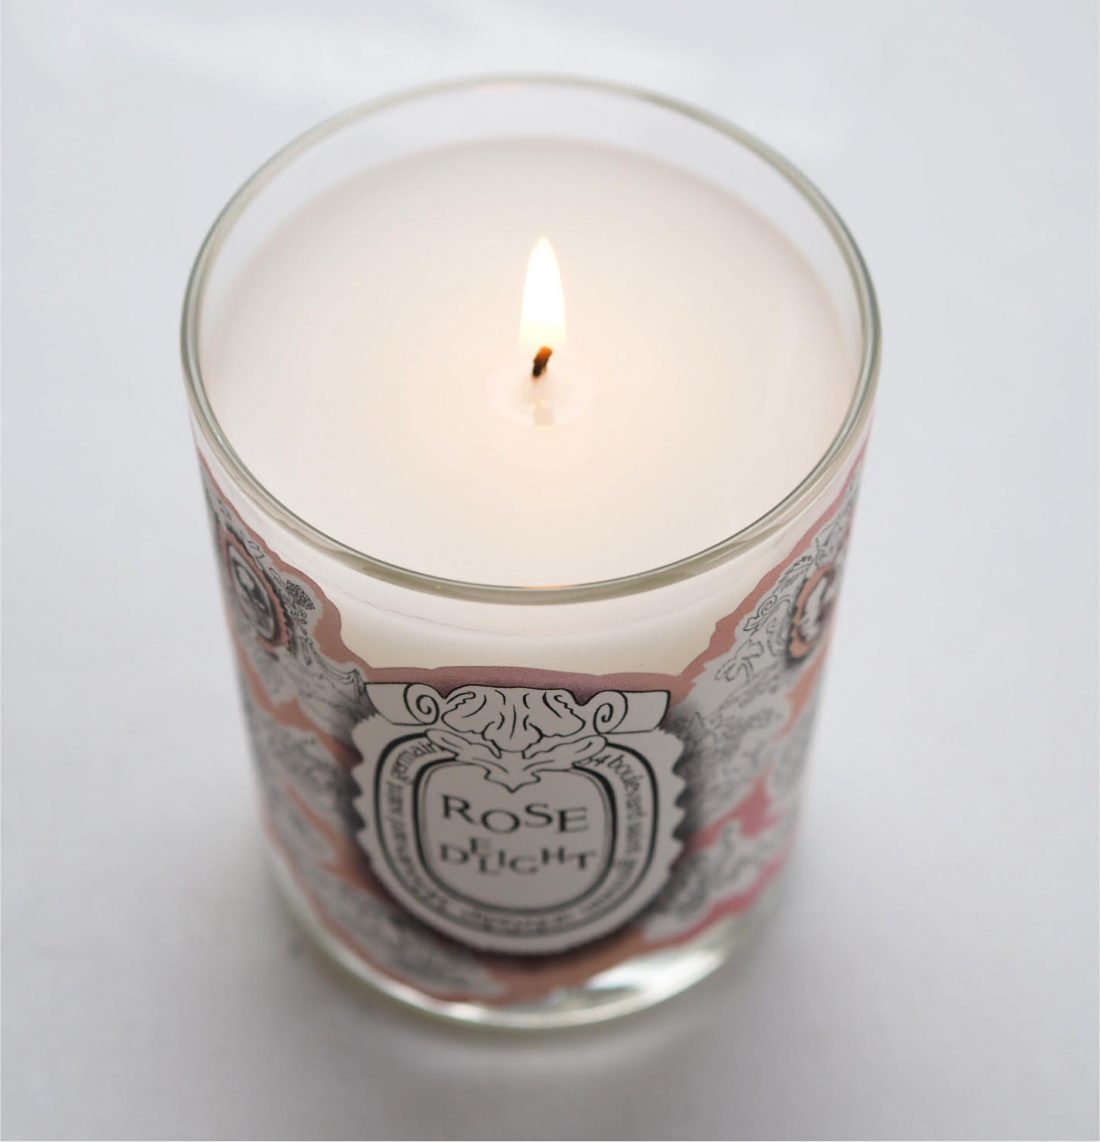 Diptyque Rose Delight Candle | British Beauty Blogger